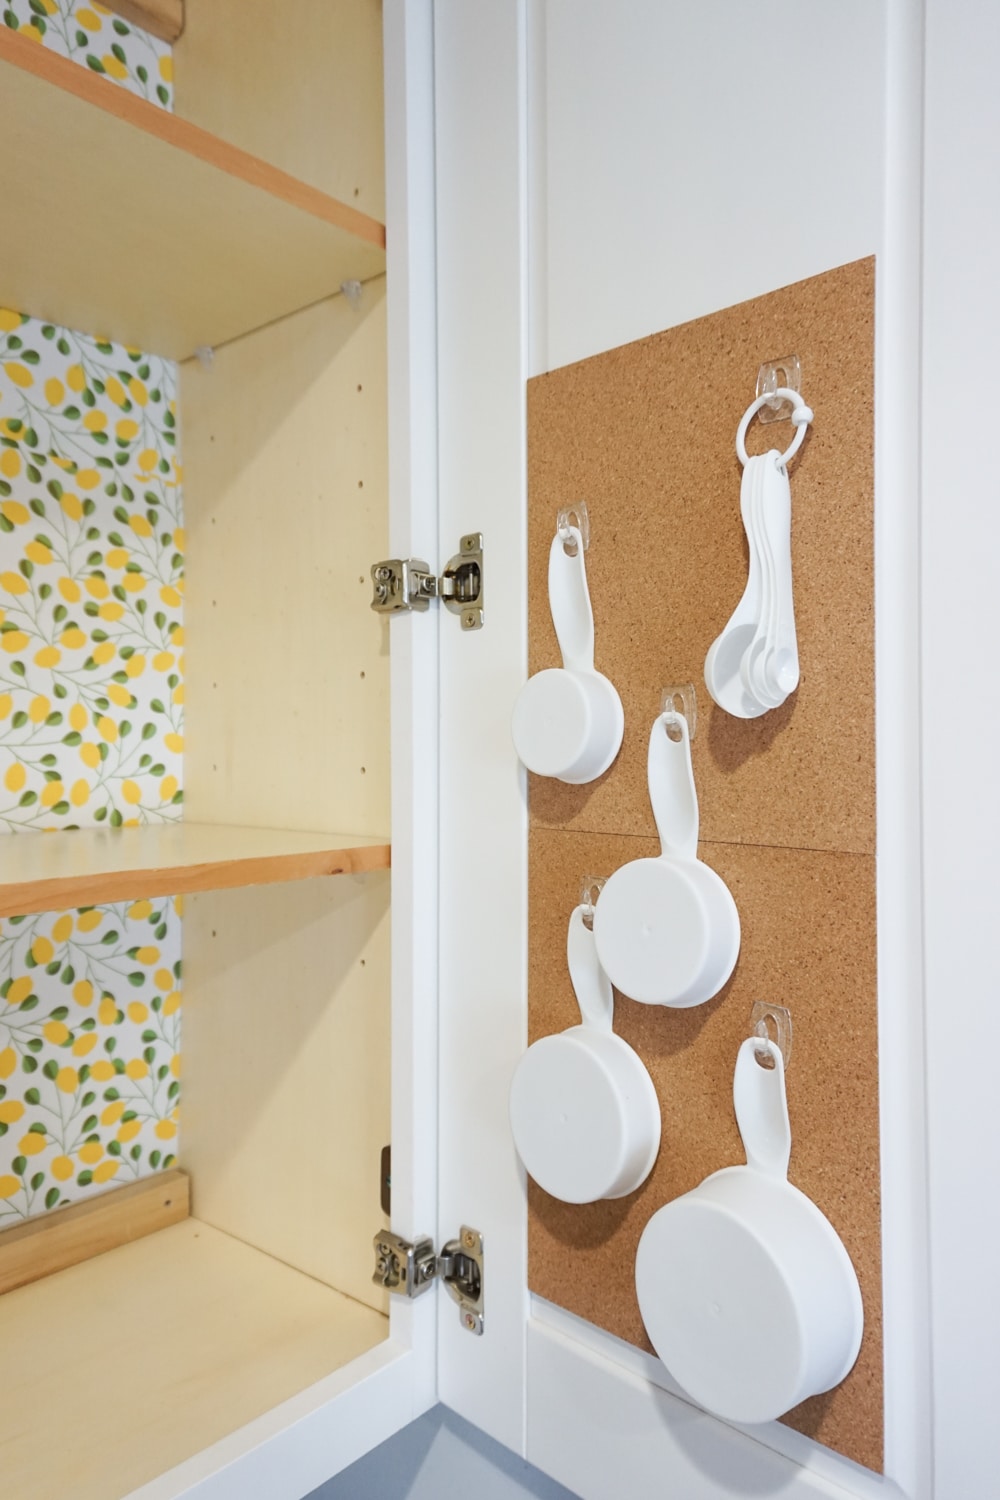 Organizing baking supplies is easy with cork tiles, command hooks, vinyl labels, and a beautiful craft paper to line the cabinet.